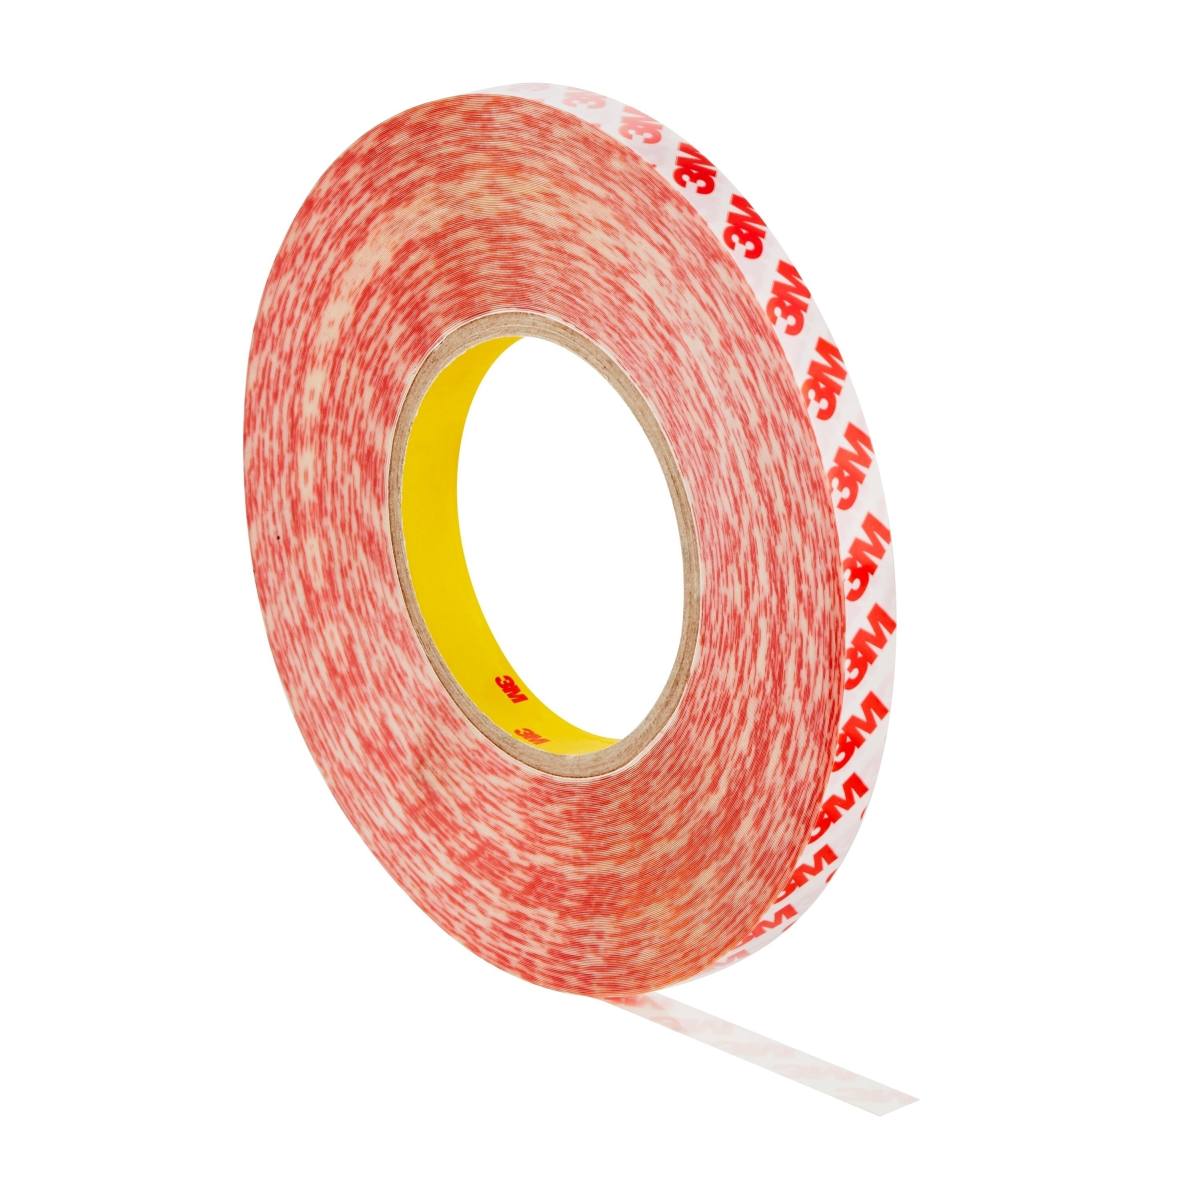 3M Double-sided adhesive tape with polyester backing GPT-020P, transparent, 15 mm x 50 m, 0.202 mm